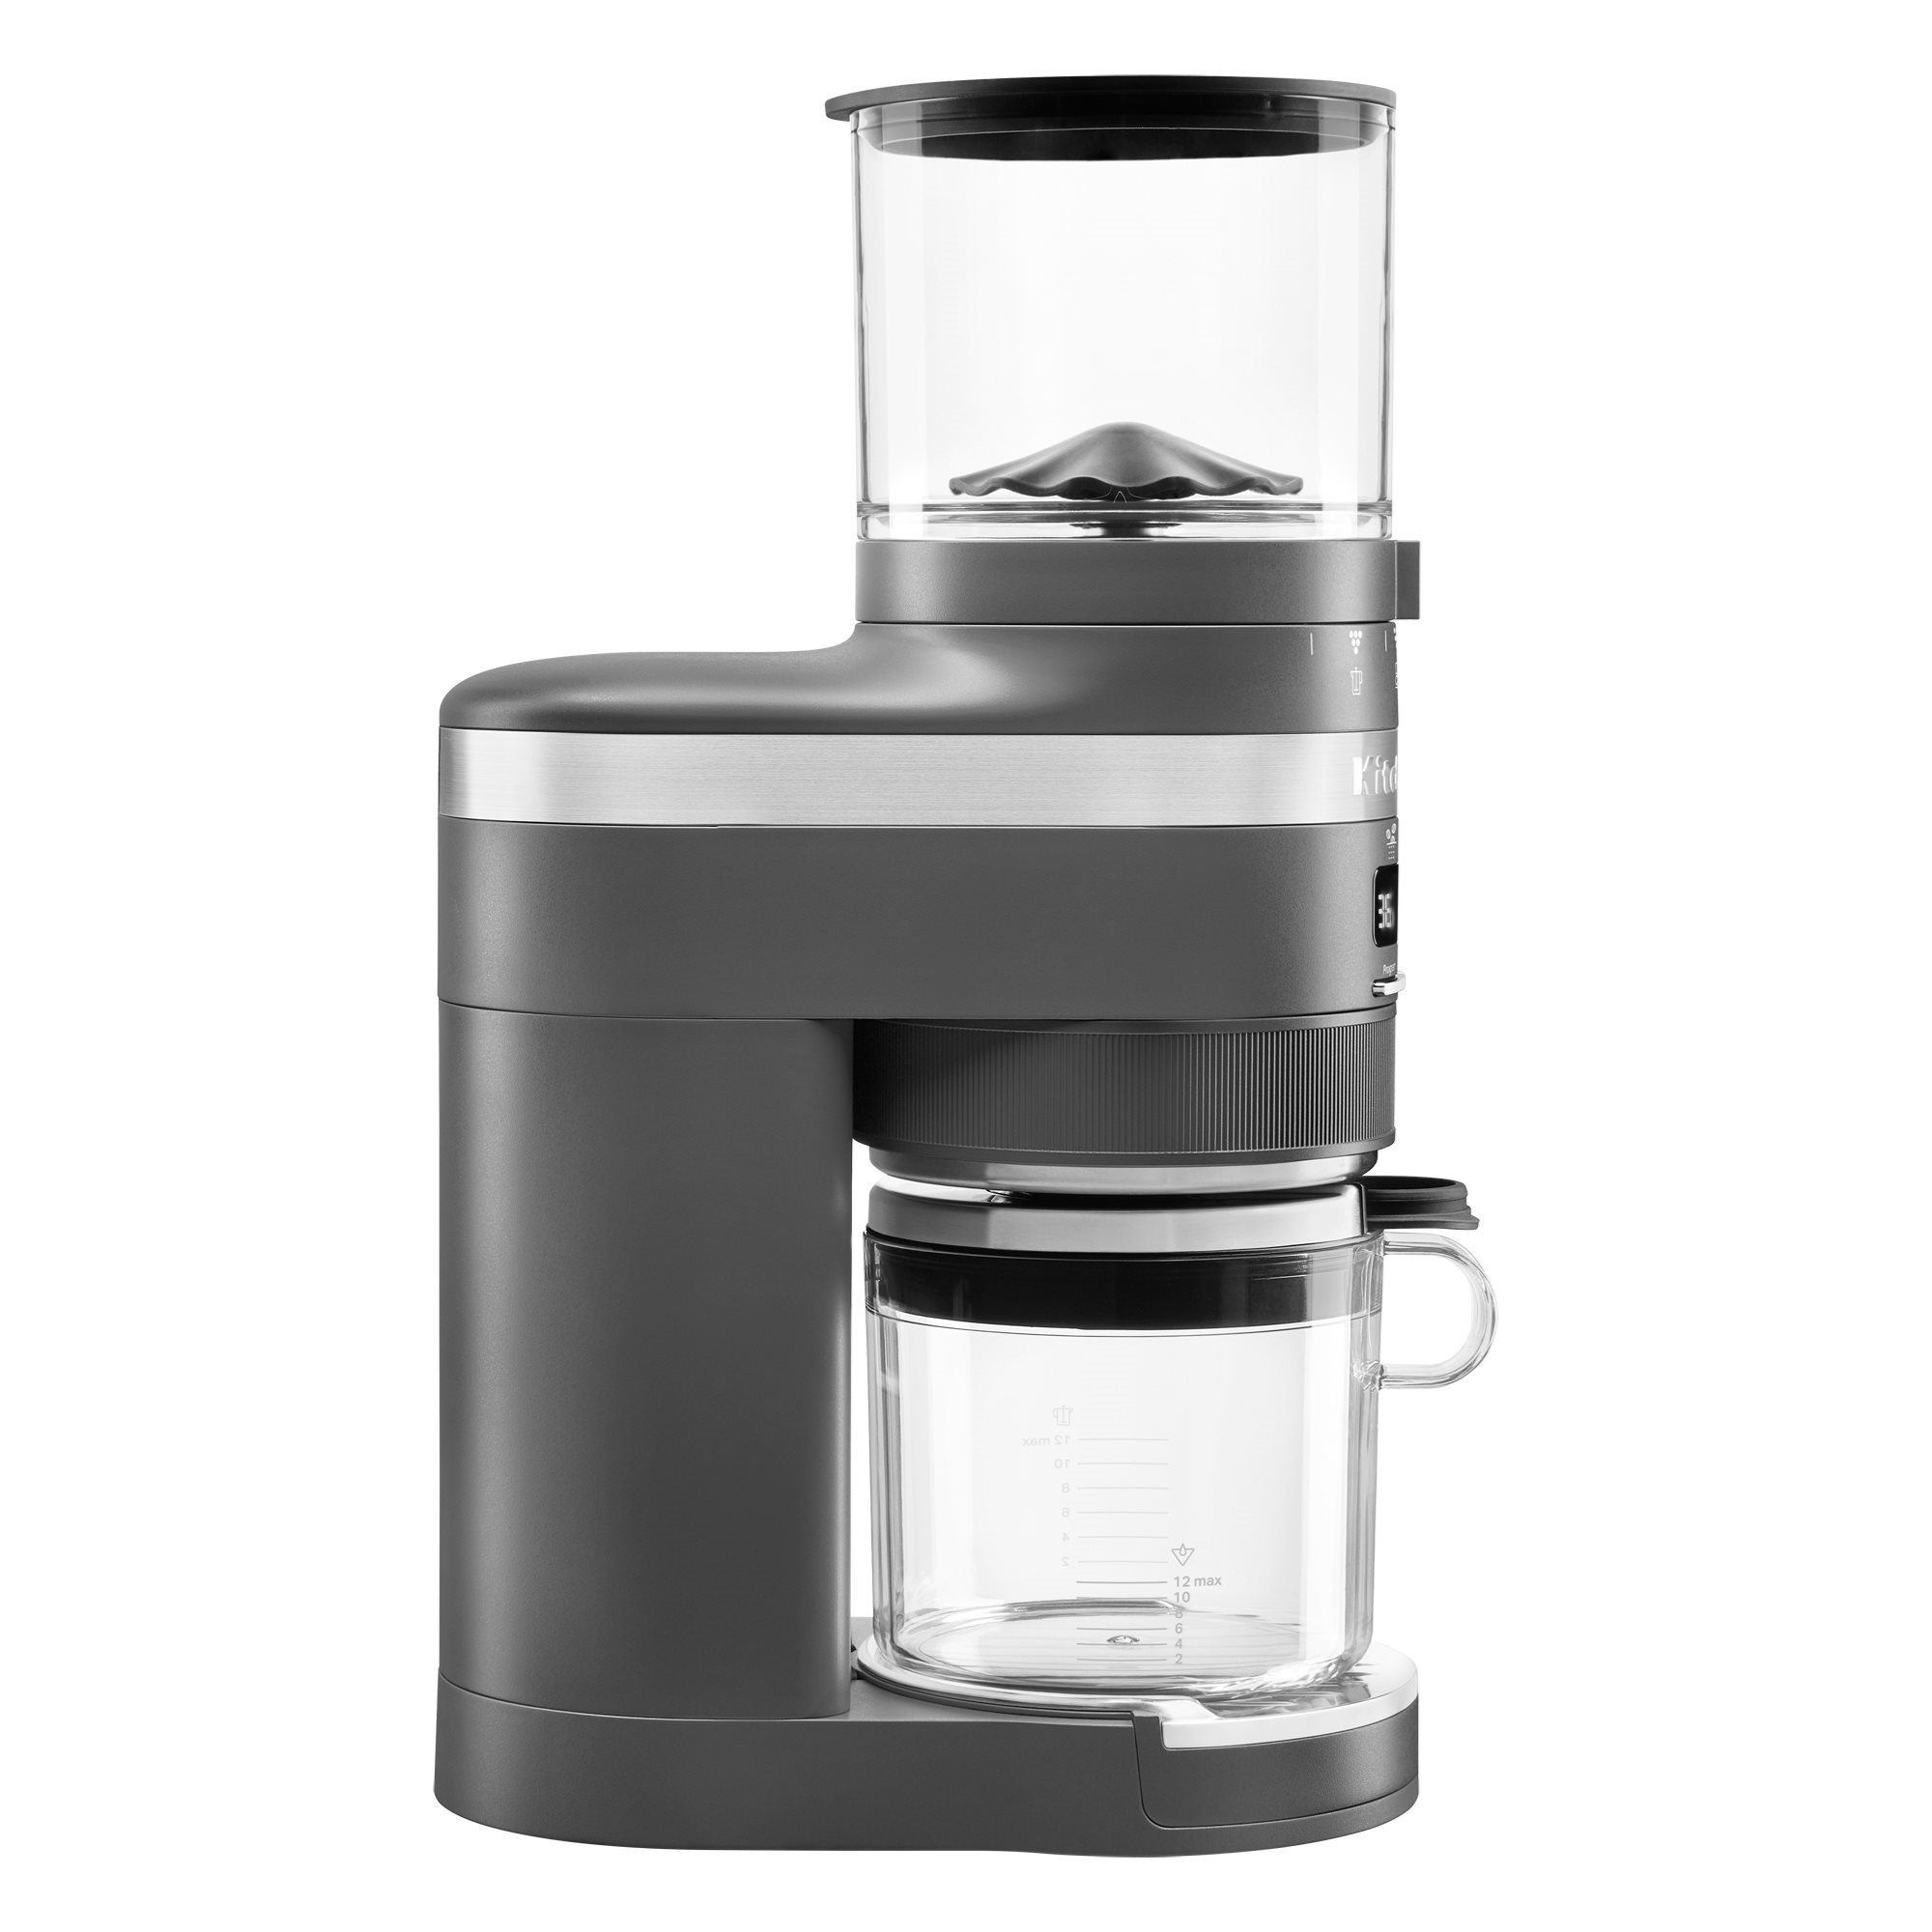 Artisan electric coffee grinder, Charcoal Gray color